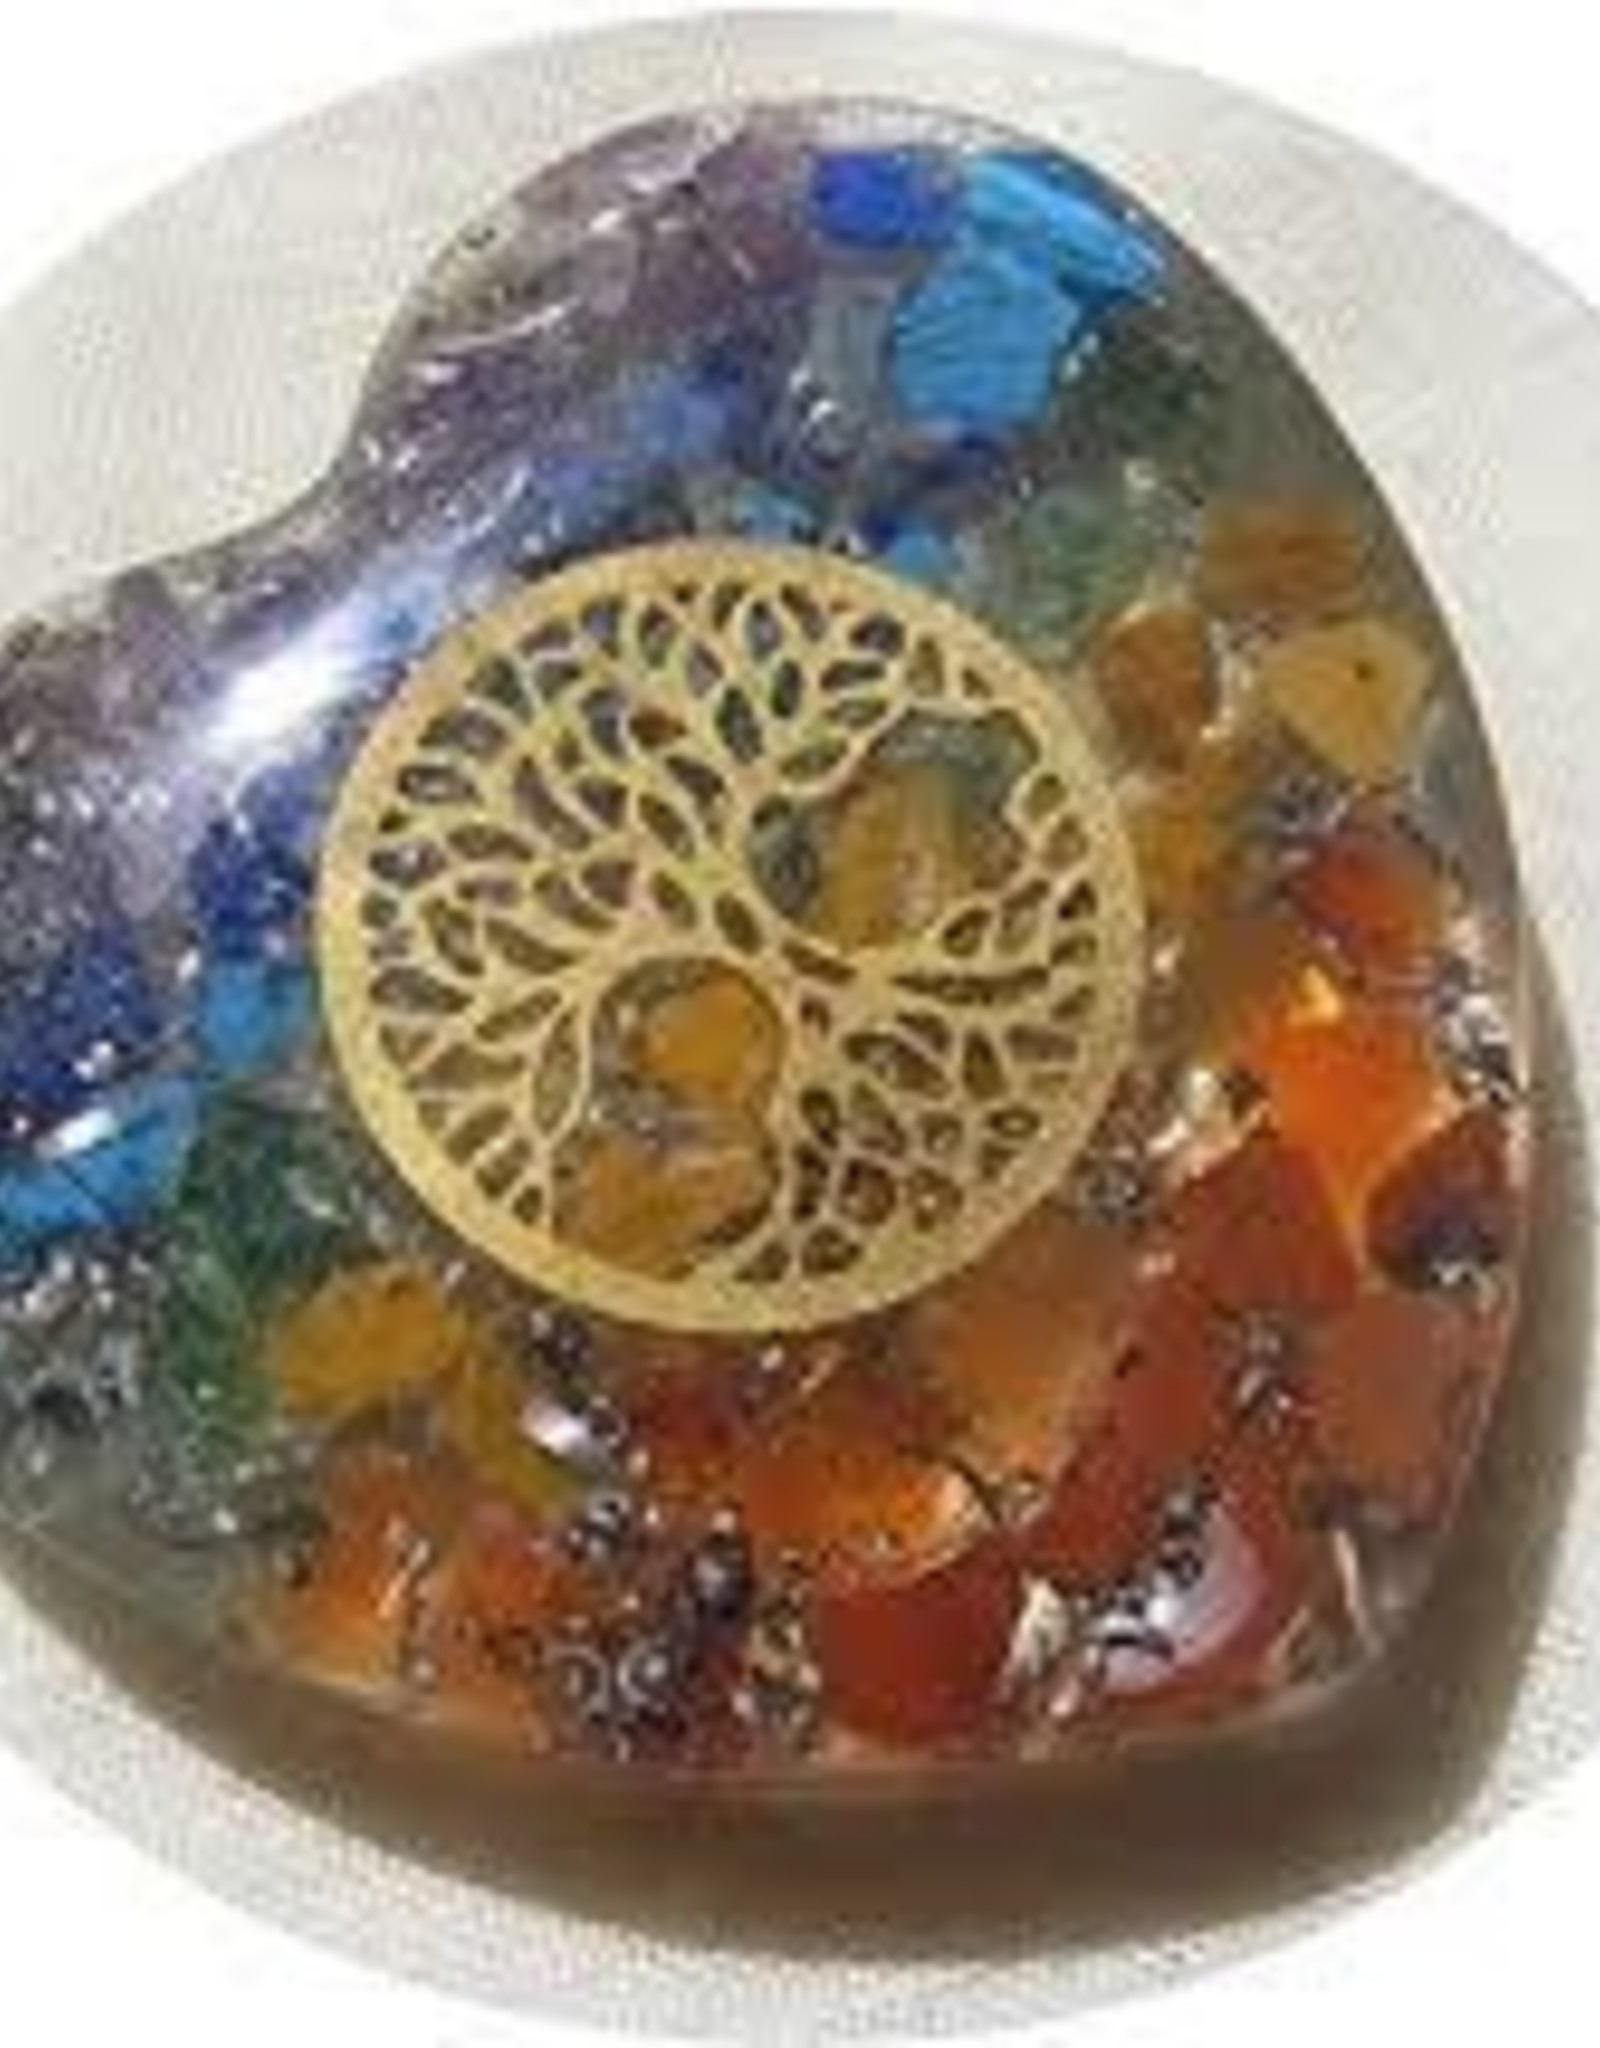 Chakra Orgonite Heart with Tree of Life